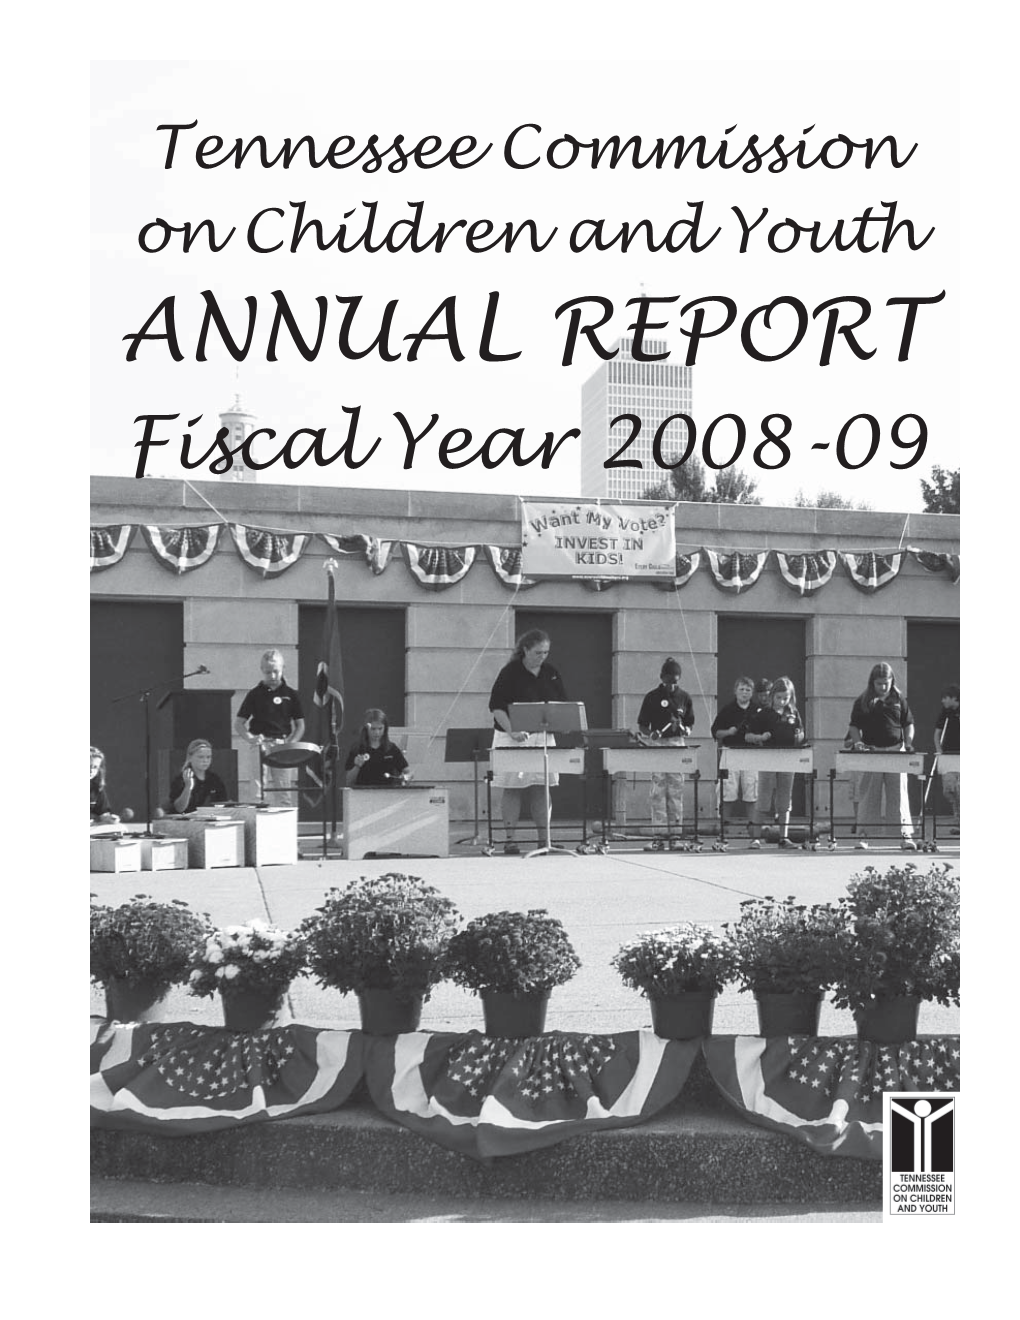 ANNUAL REPORT Fiscal Year 2008-09